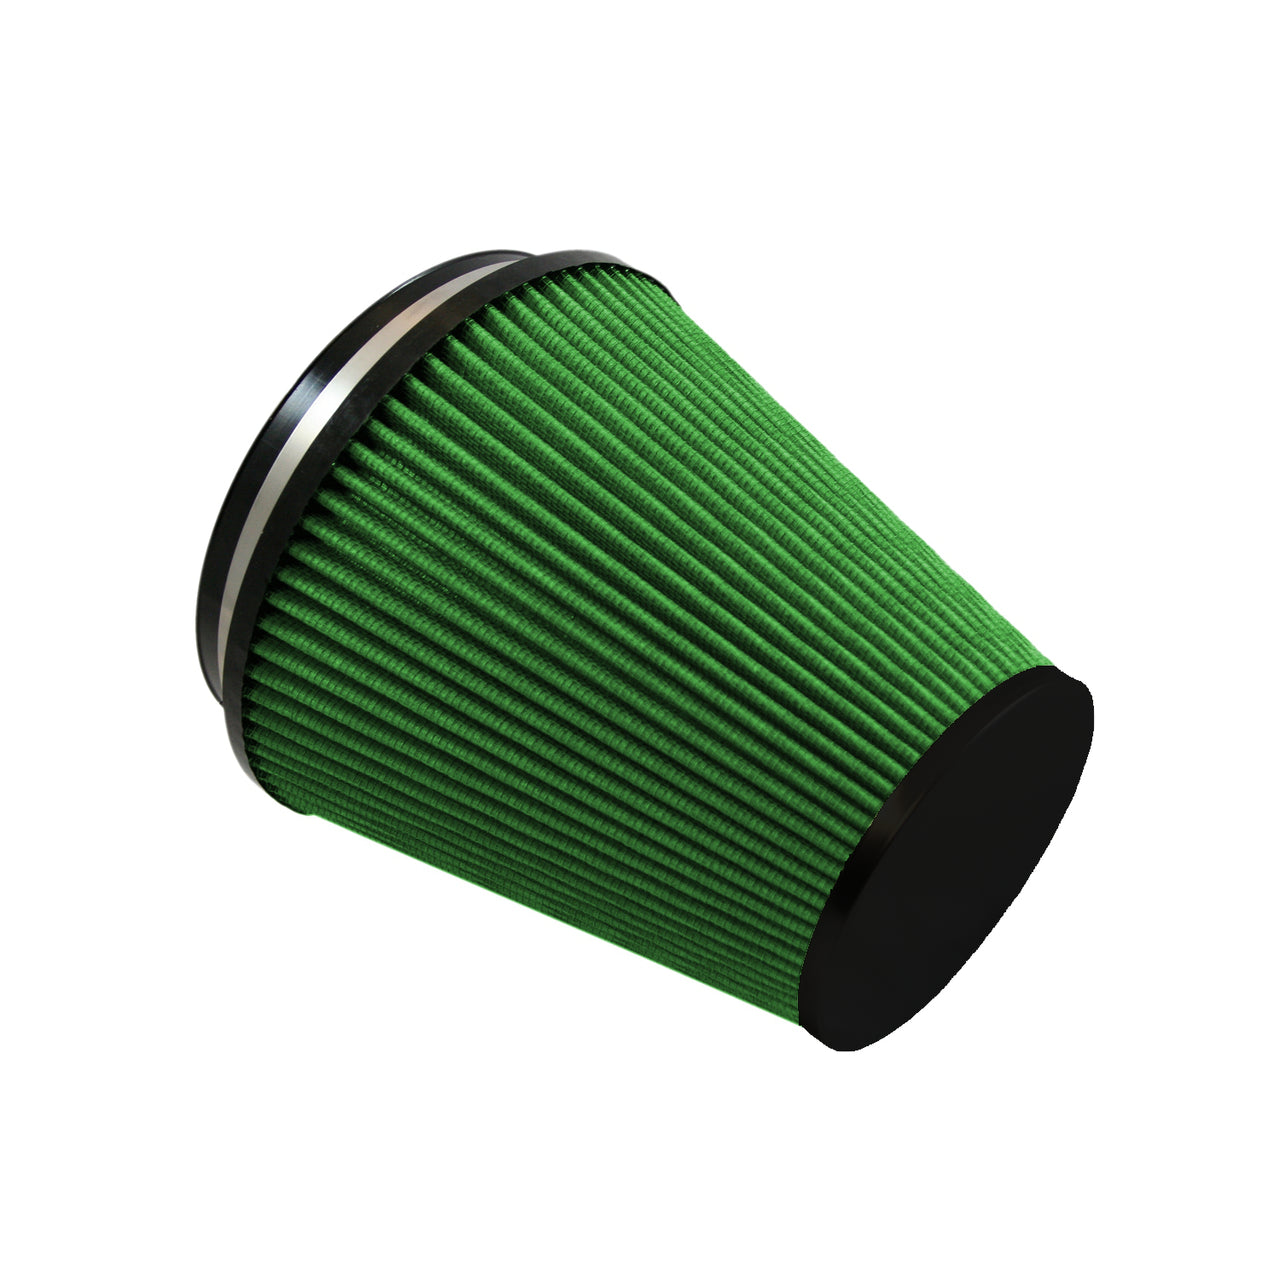 Green Filter Cone Filter - ID 6in. / Base 7.5in. / Top 4.75in. / H 8in.